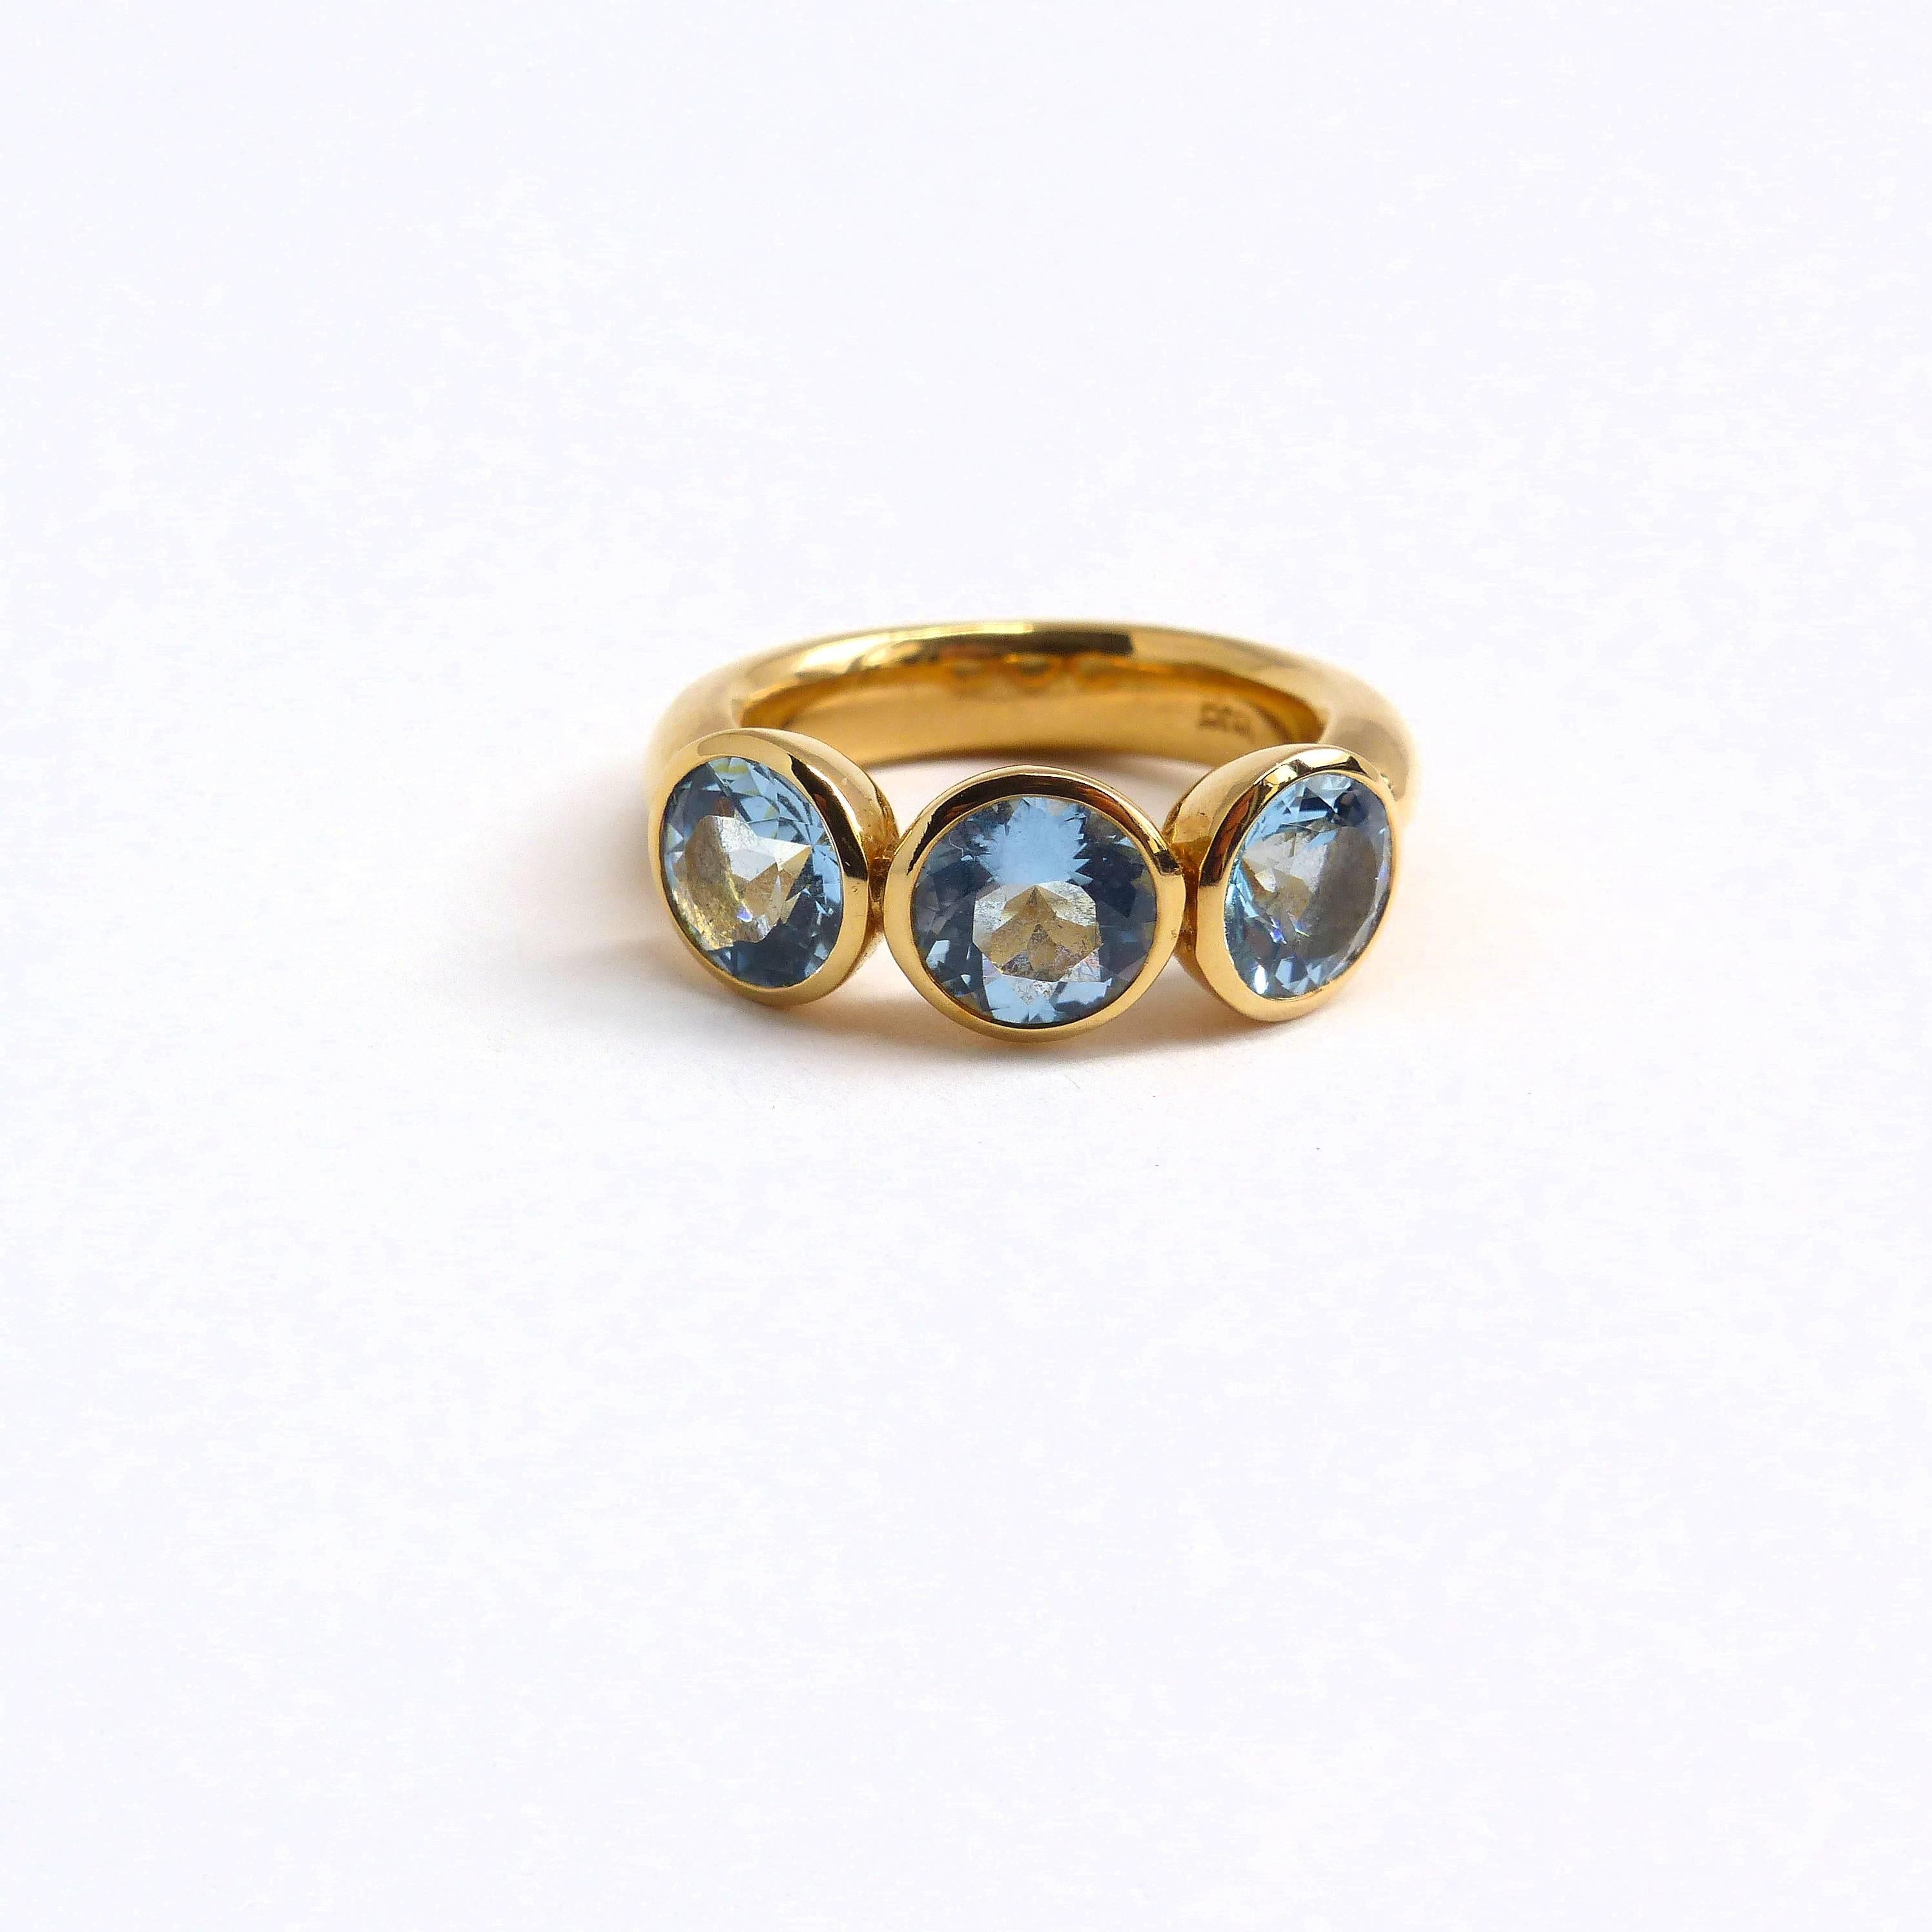 This 18k rose gold (11.52g) ring is set with 3x fine Aquamarines (facetted, round, 8mm, 3.29cts). 

Ringsize: 7 (54.5)
